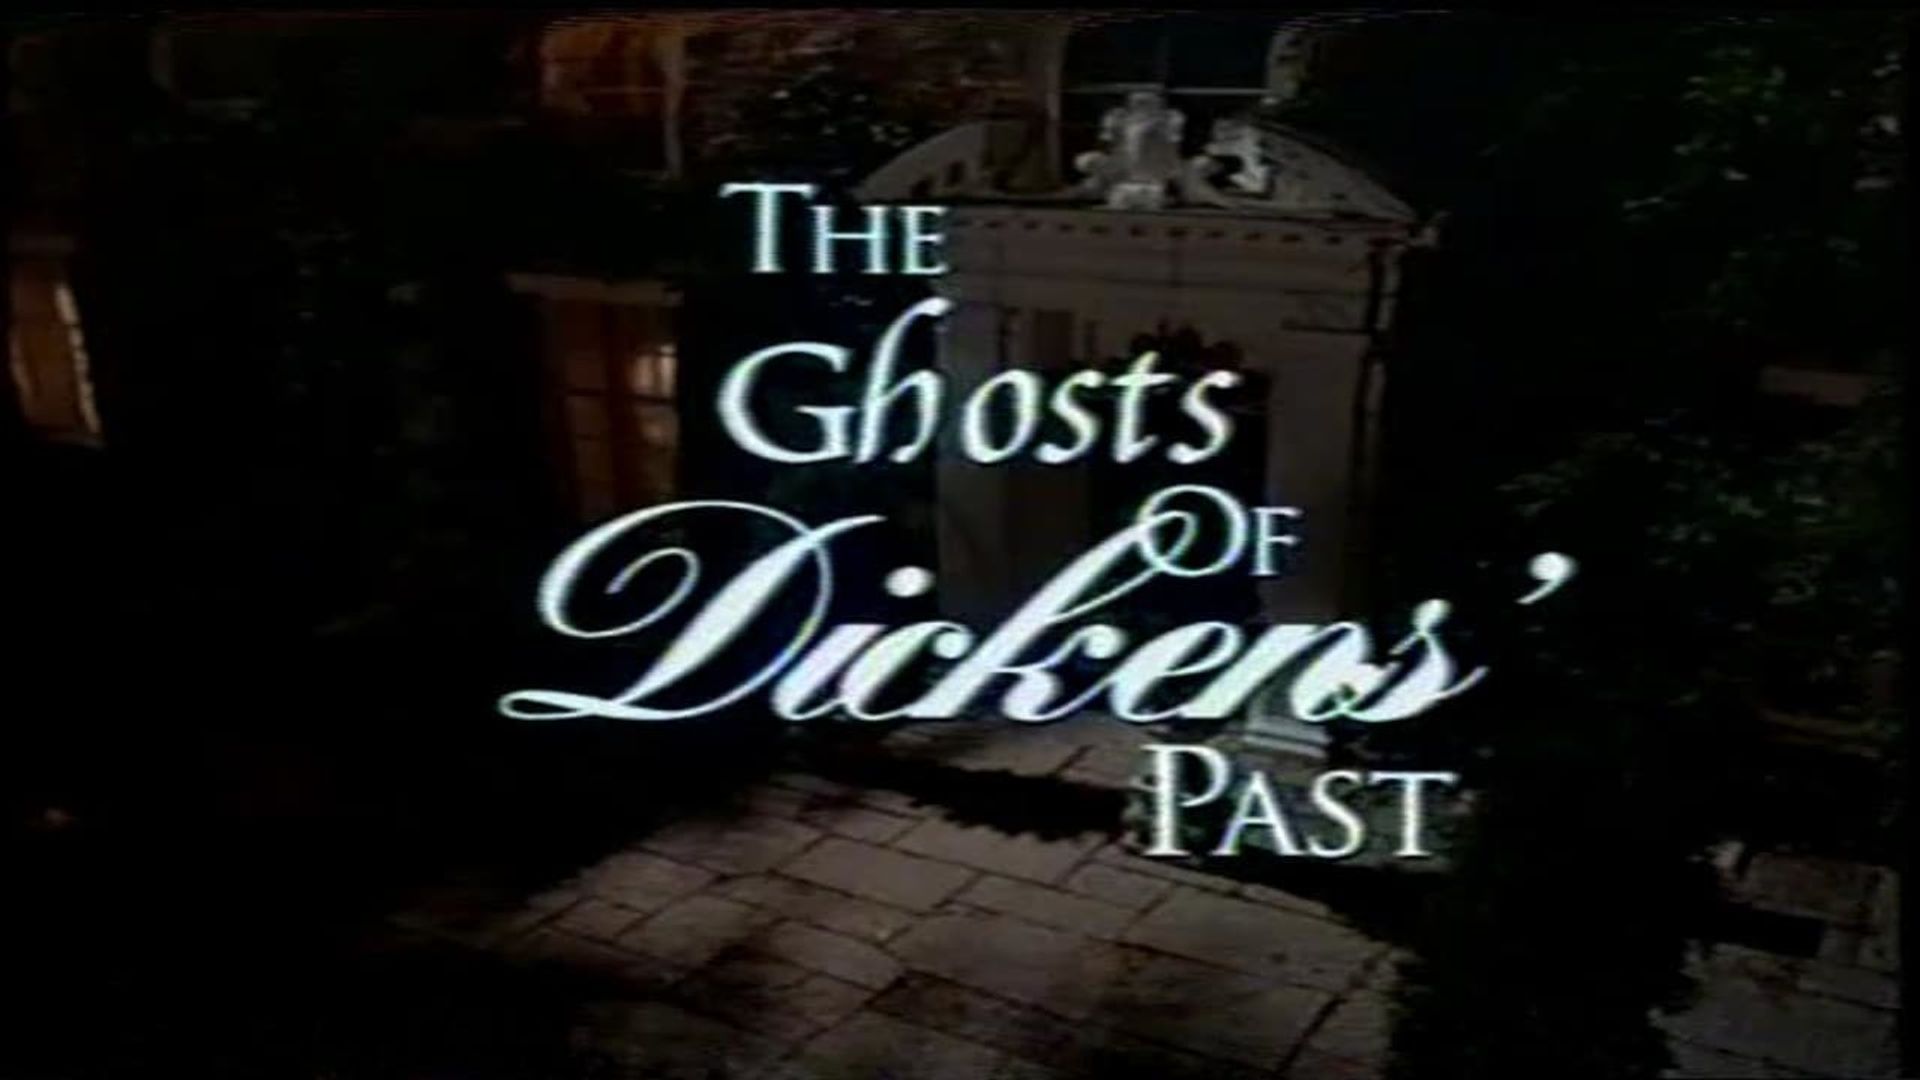 The Ghosts of Dickens' Past background